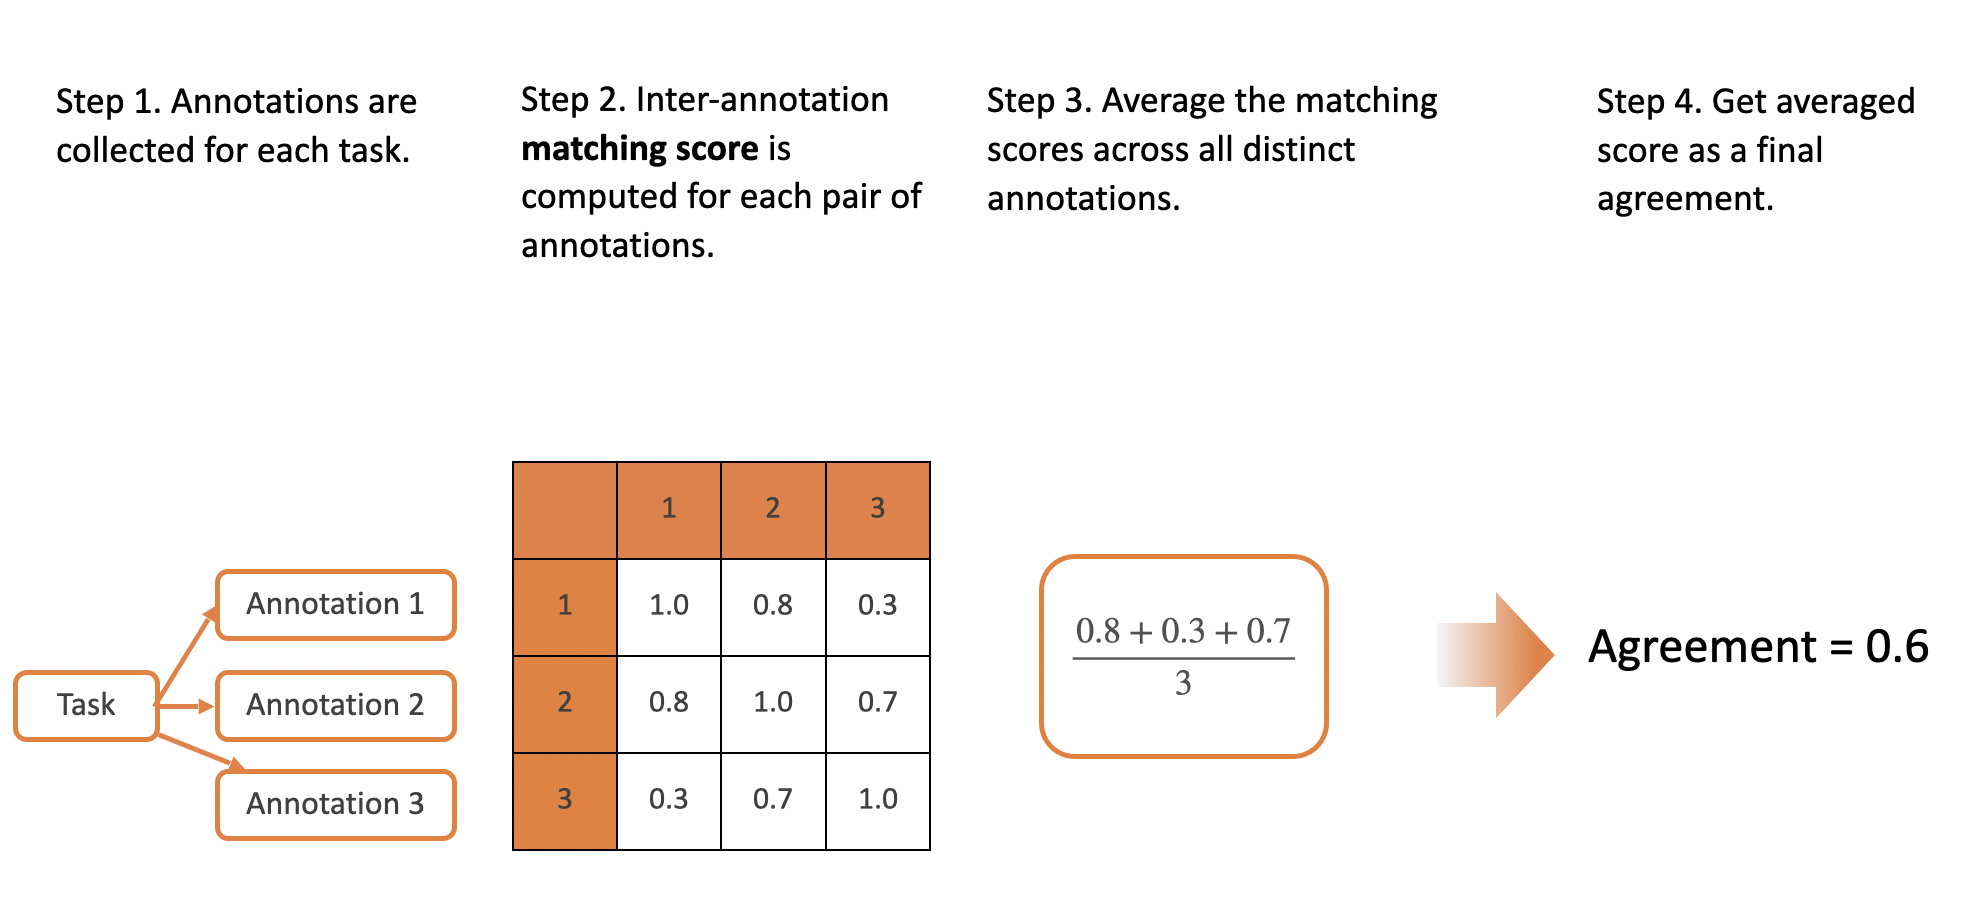 Diagram showing annotations are collected for each task, agreement scores are computed for each pair, the resulting scores are averaged for a task.